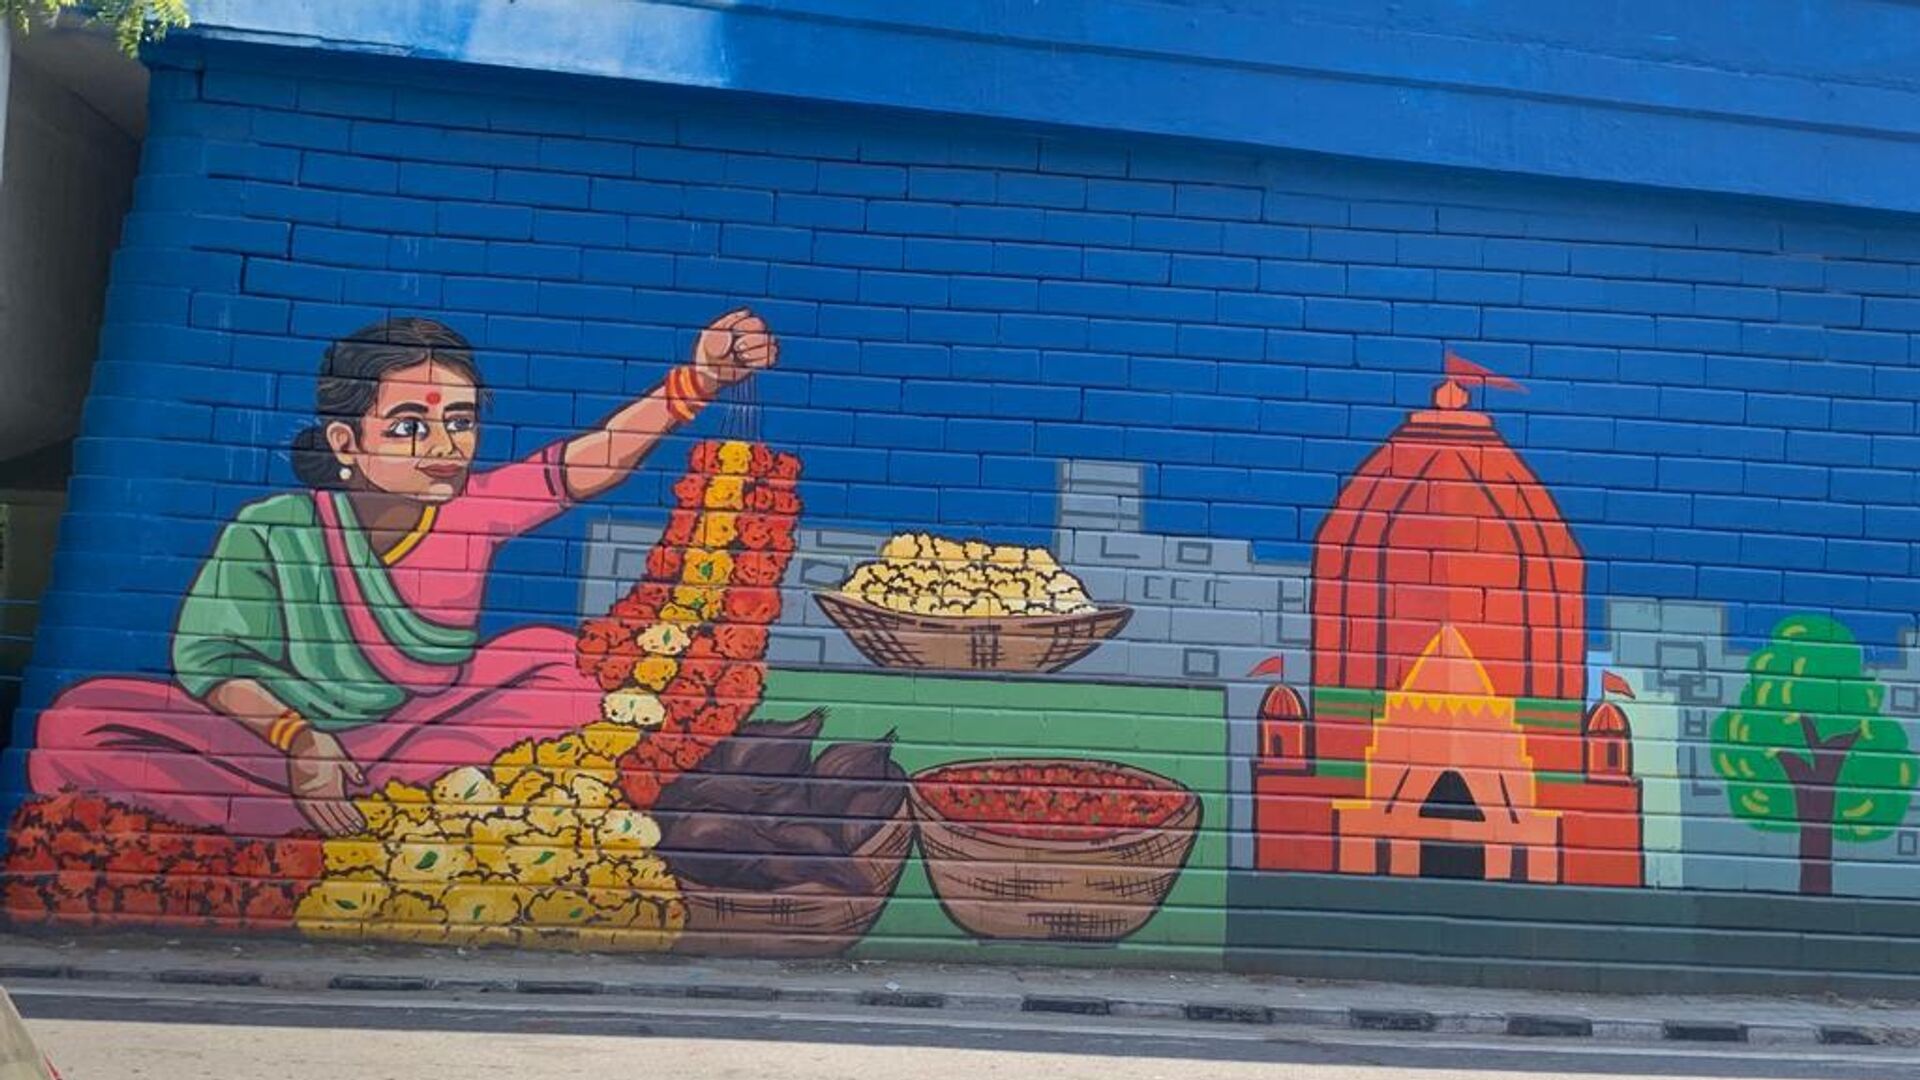 Delhi Street Art artists painted the town with creative murals on the walls of flyovers, pillars and buildings ahead of G20 Summit in New Delhi. - Sputnik भारत, 1920, 08.09.2023